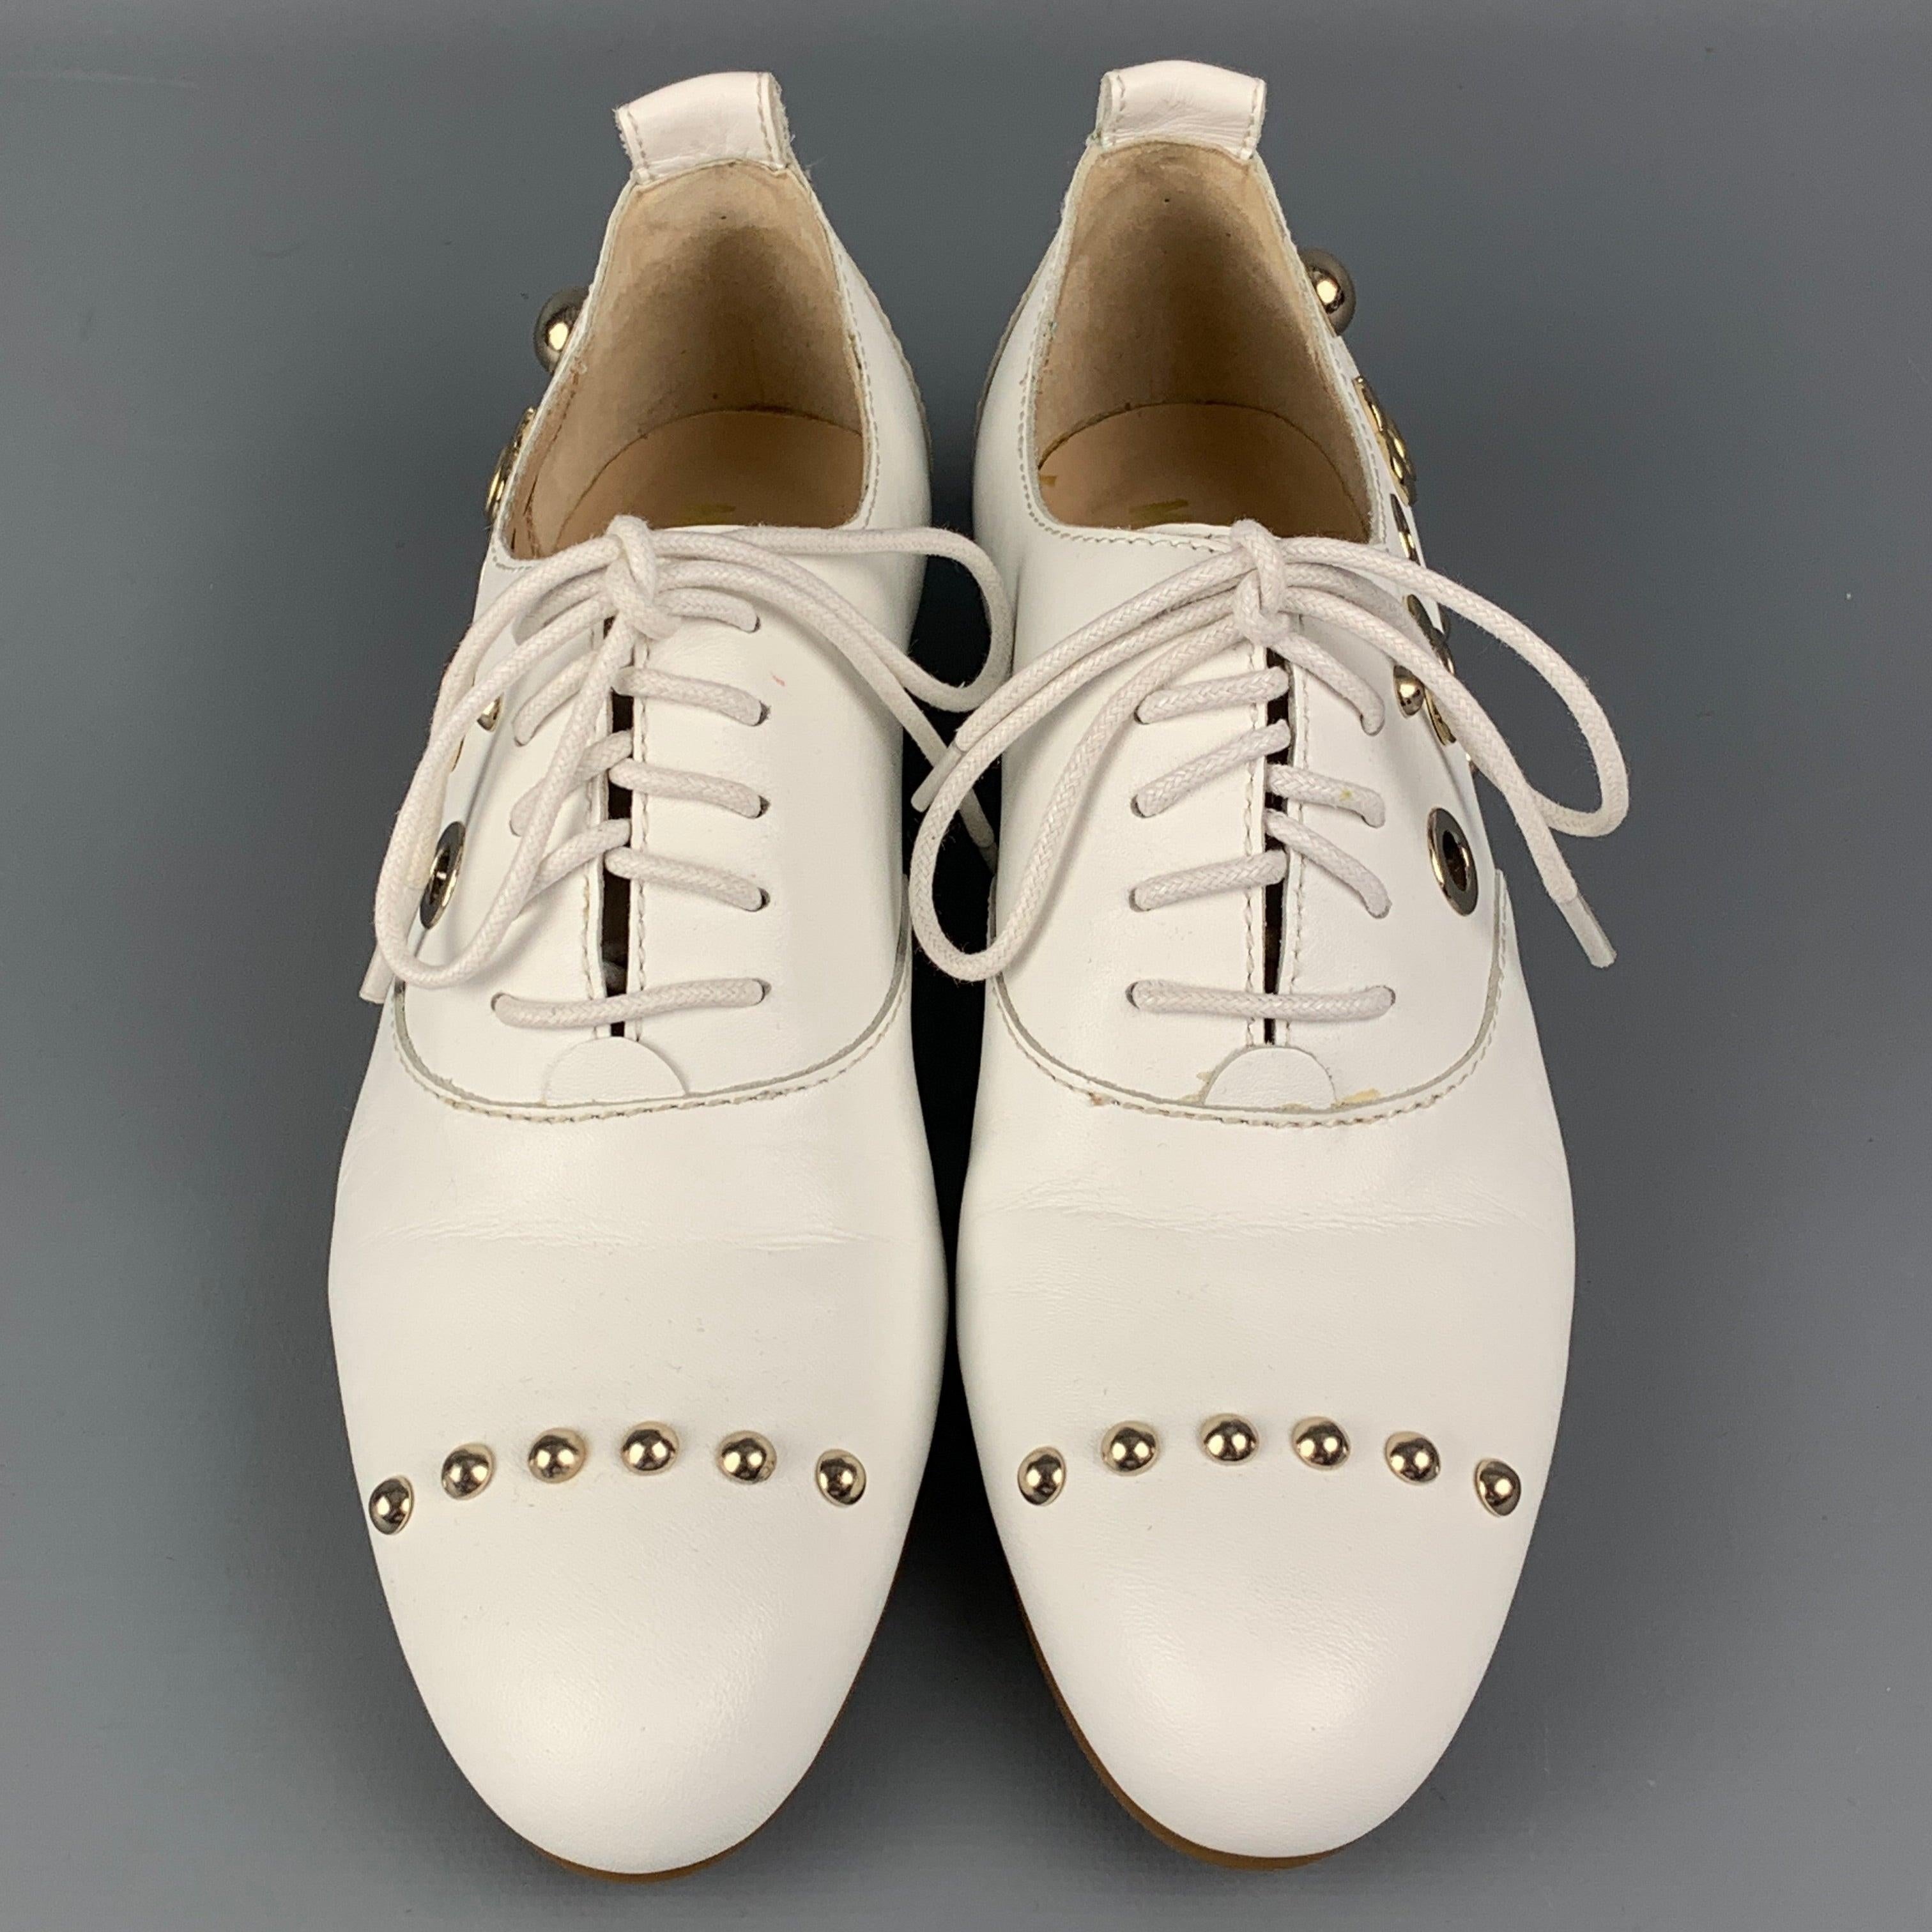 Women's LOVE MOSCHINO Size 5.5 White Leather Studded Flats